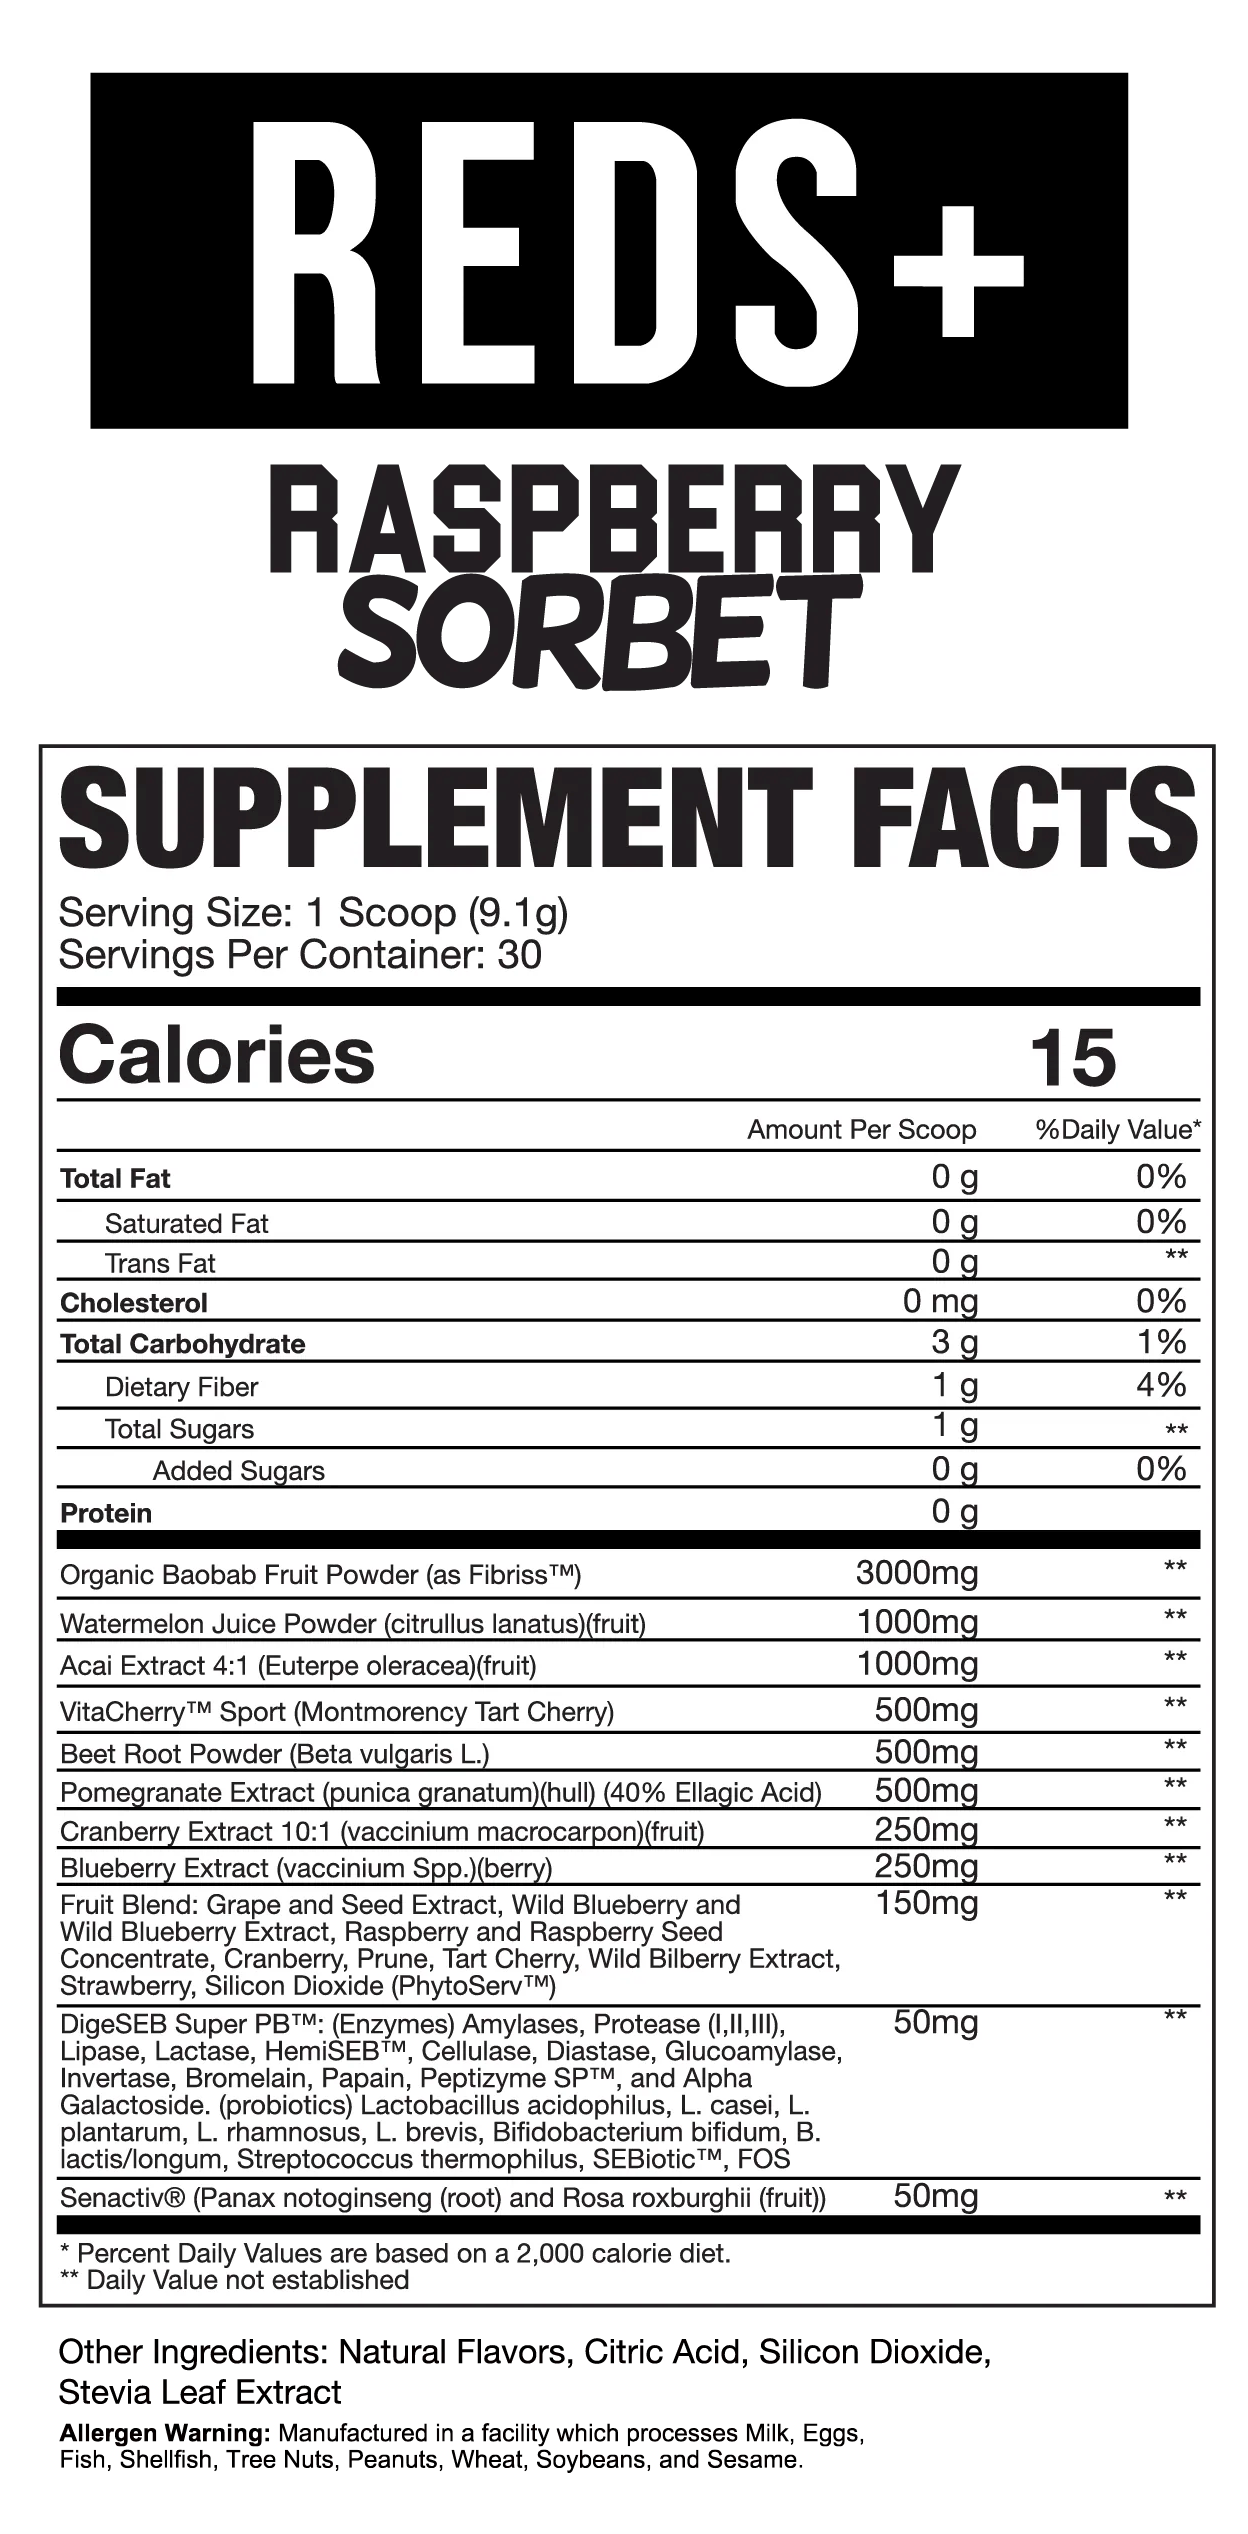 Supplement facts for REDS+ Raspberry Sorbet: serving size 1 scoop, contains various fruit extracts, enzymes, probiotics. May contain allergens.